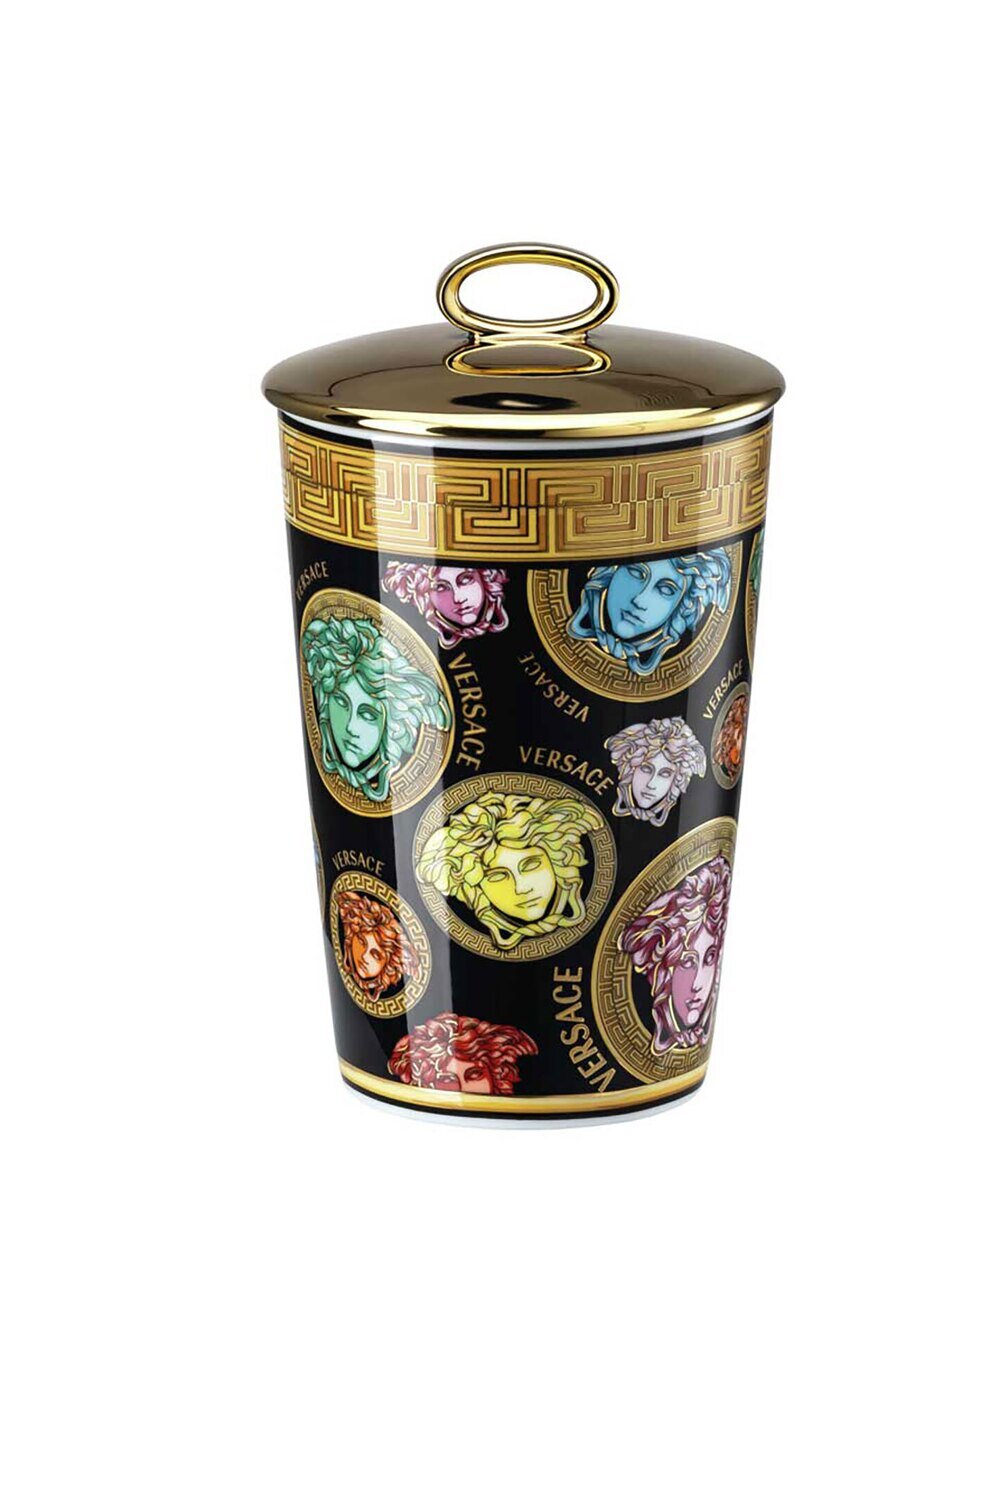 Versace Medusa Amplified- Multicolor Scented Votive with Lid 5 1/2 Inch